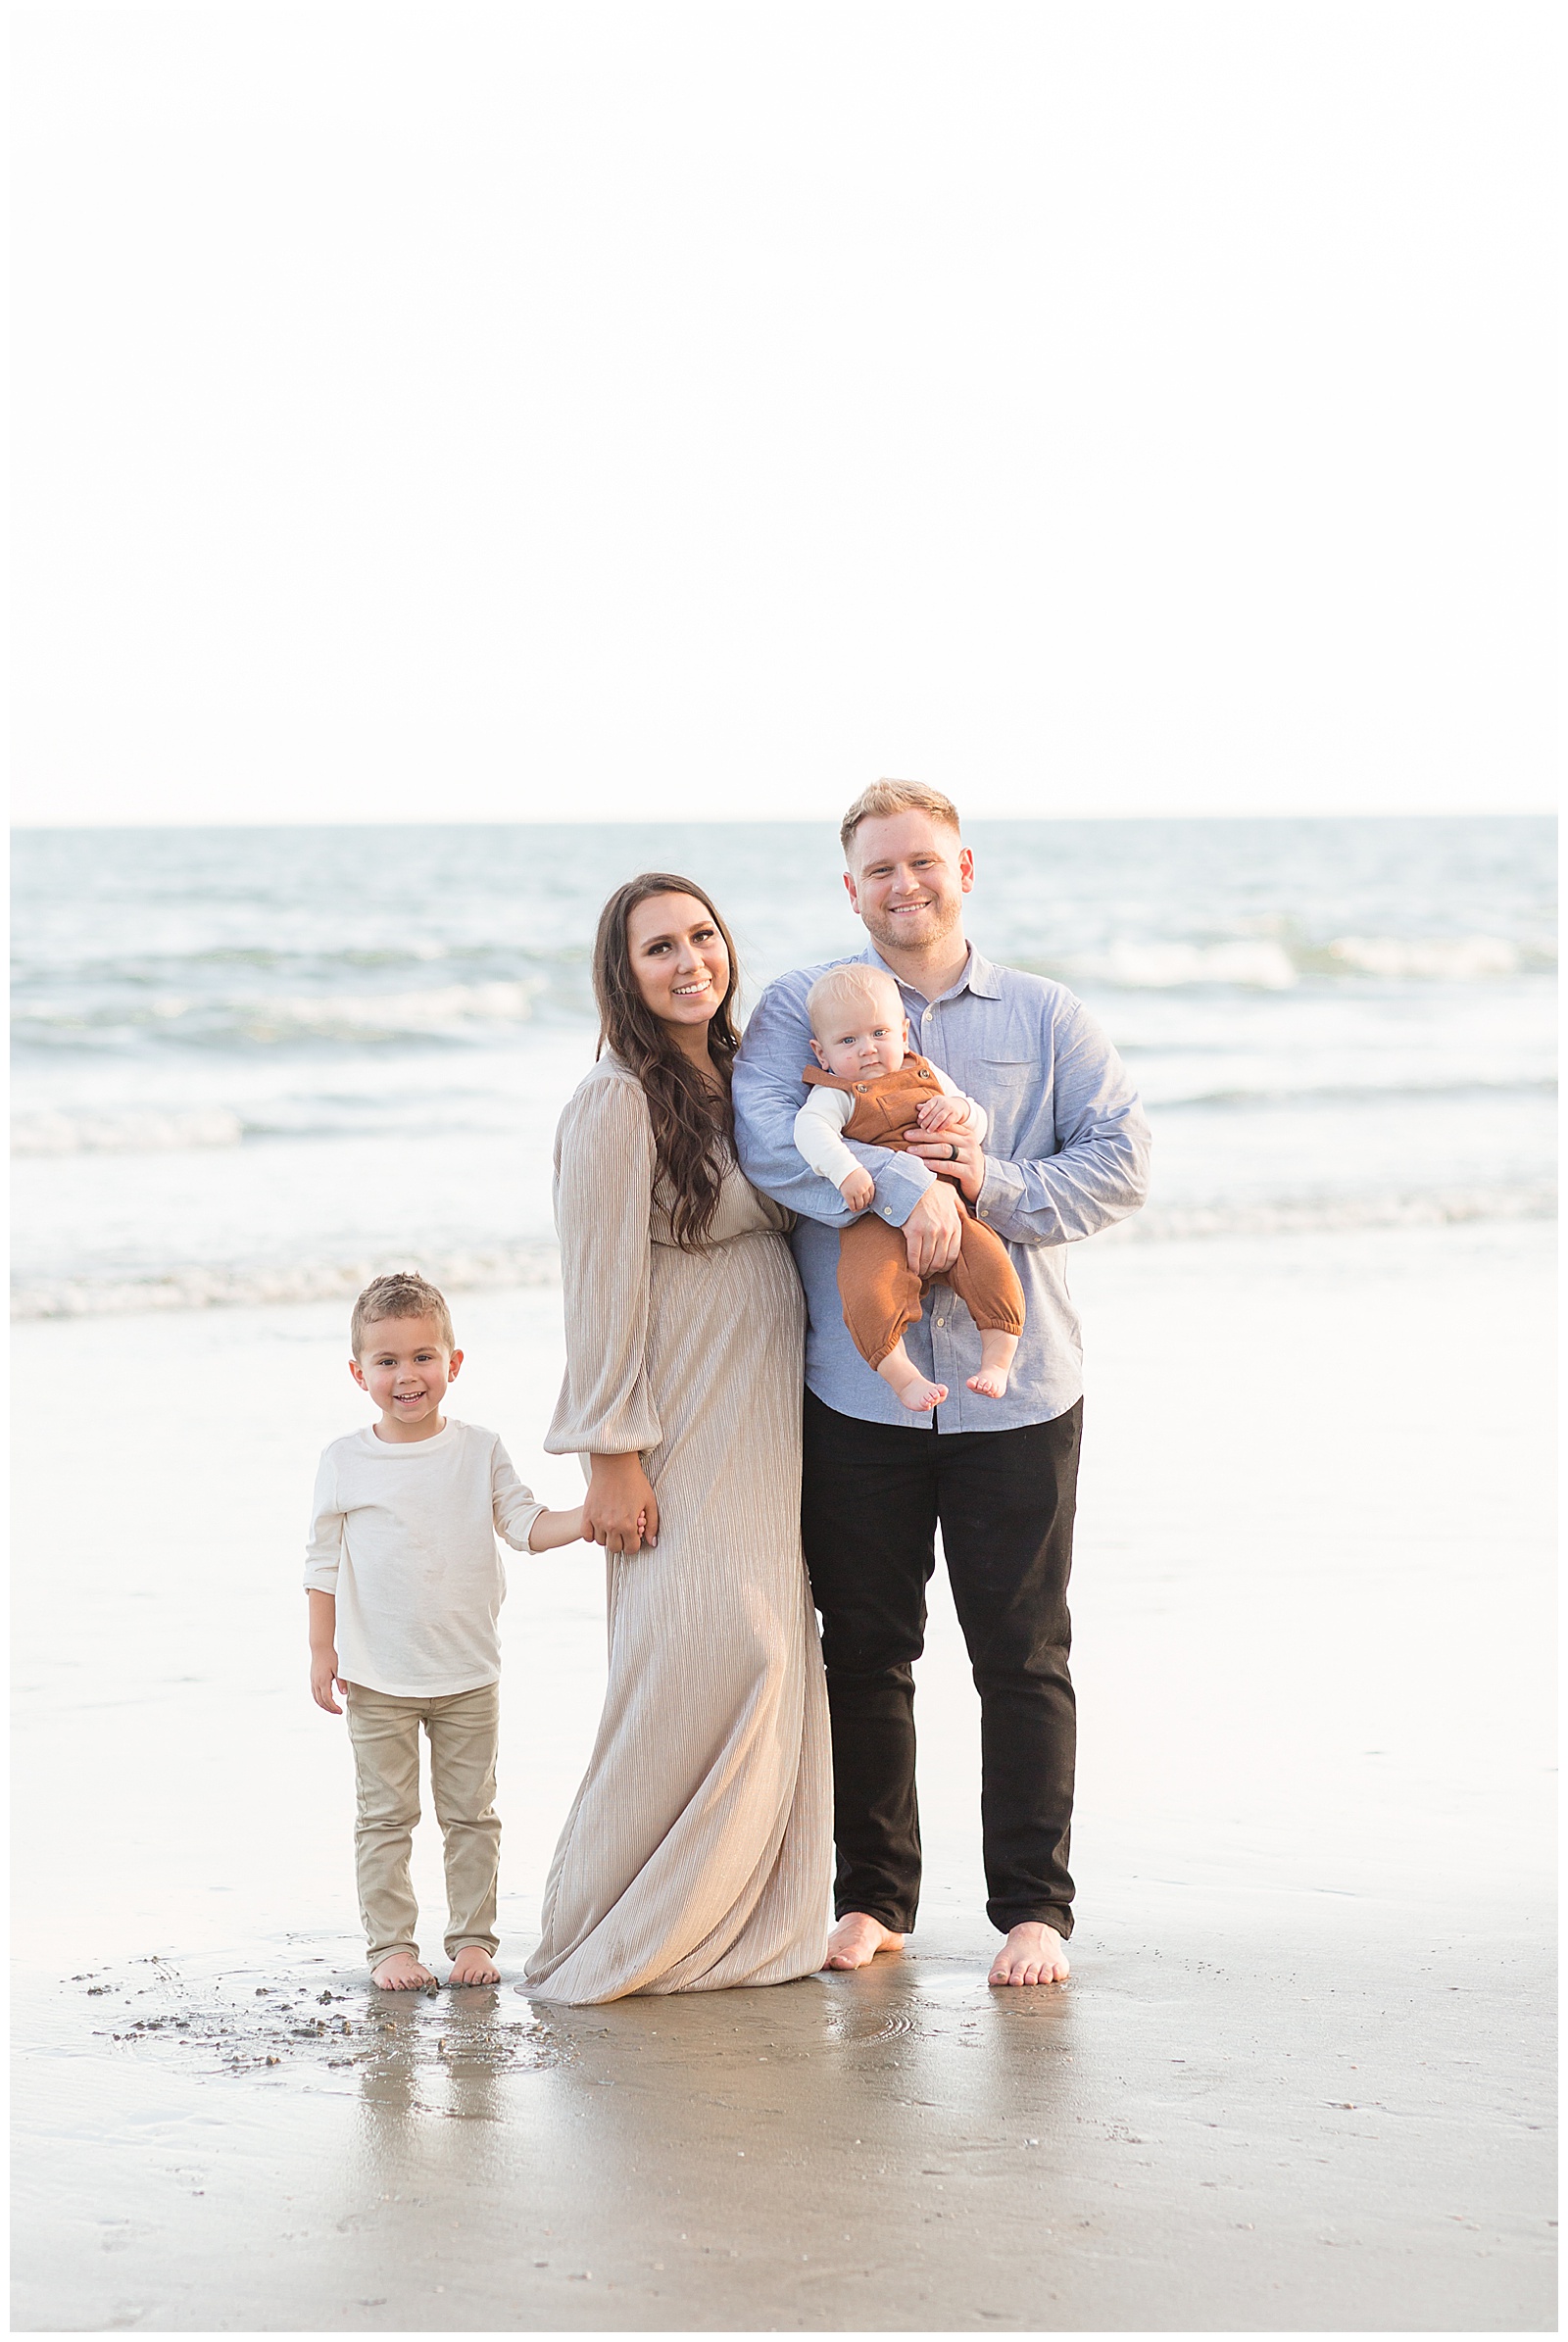 Mom and Dad stand together with two sons on the beaches of Charleston as family photographer, Rebecca Rice, captures their smiles. Family wears coordinating outfits of neutral colors.